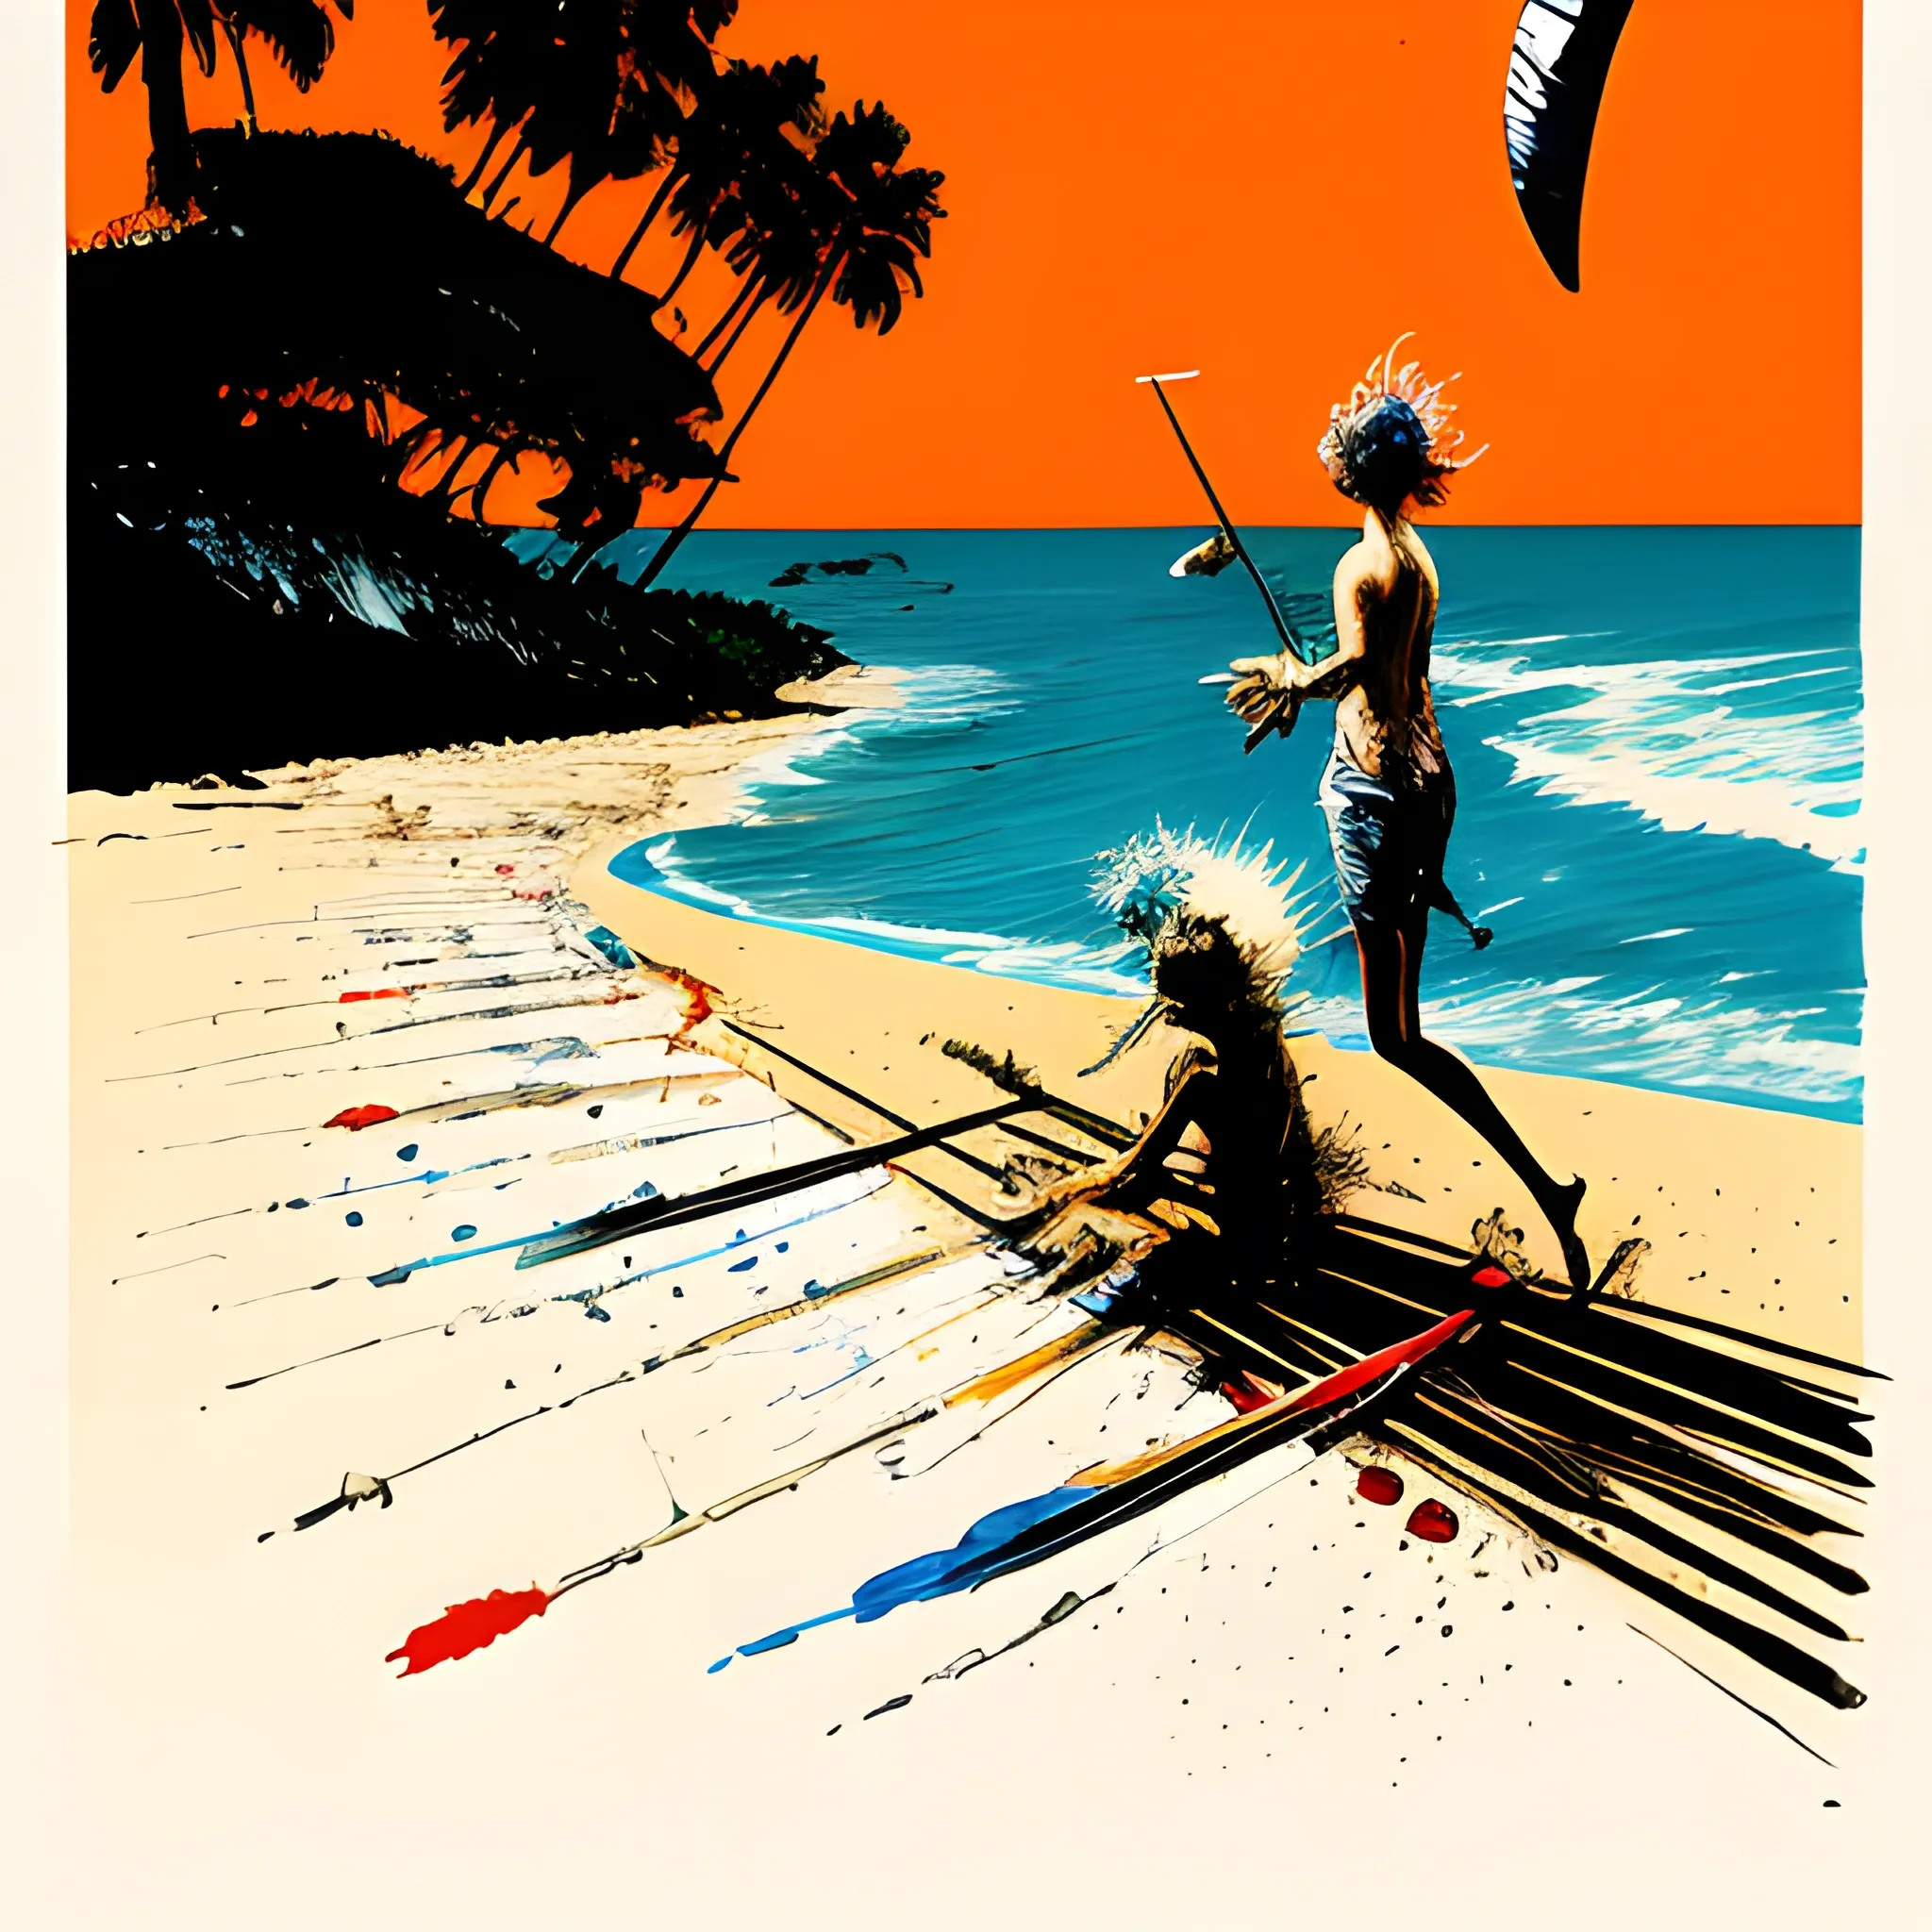 Ralph Steadman painting of the endless summer poster